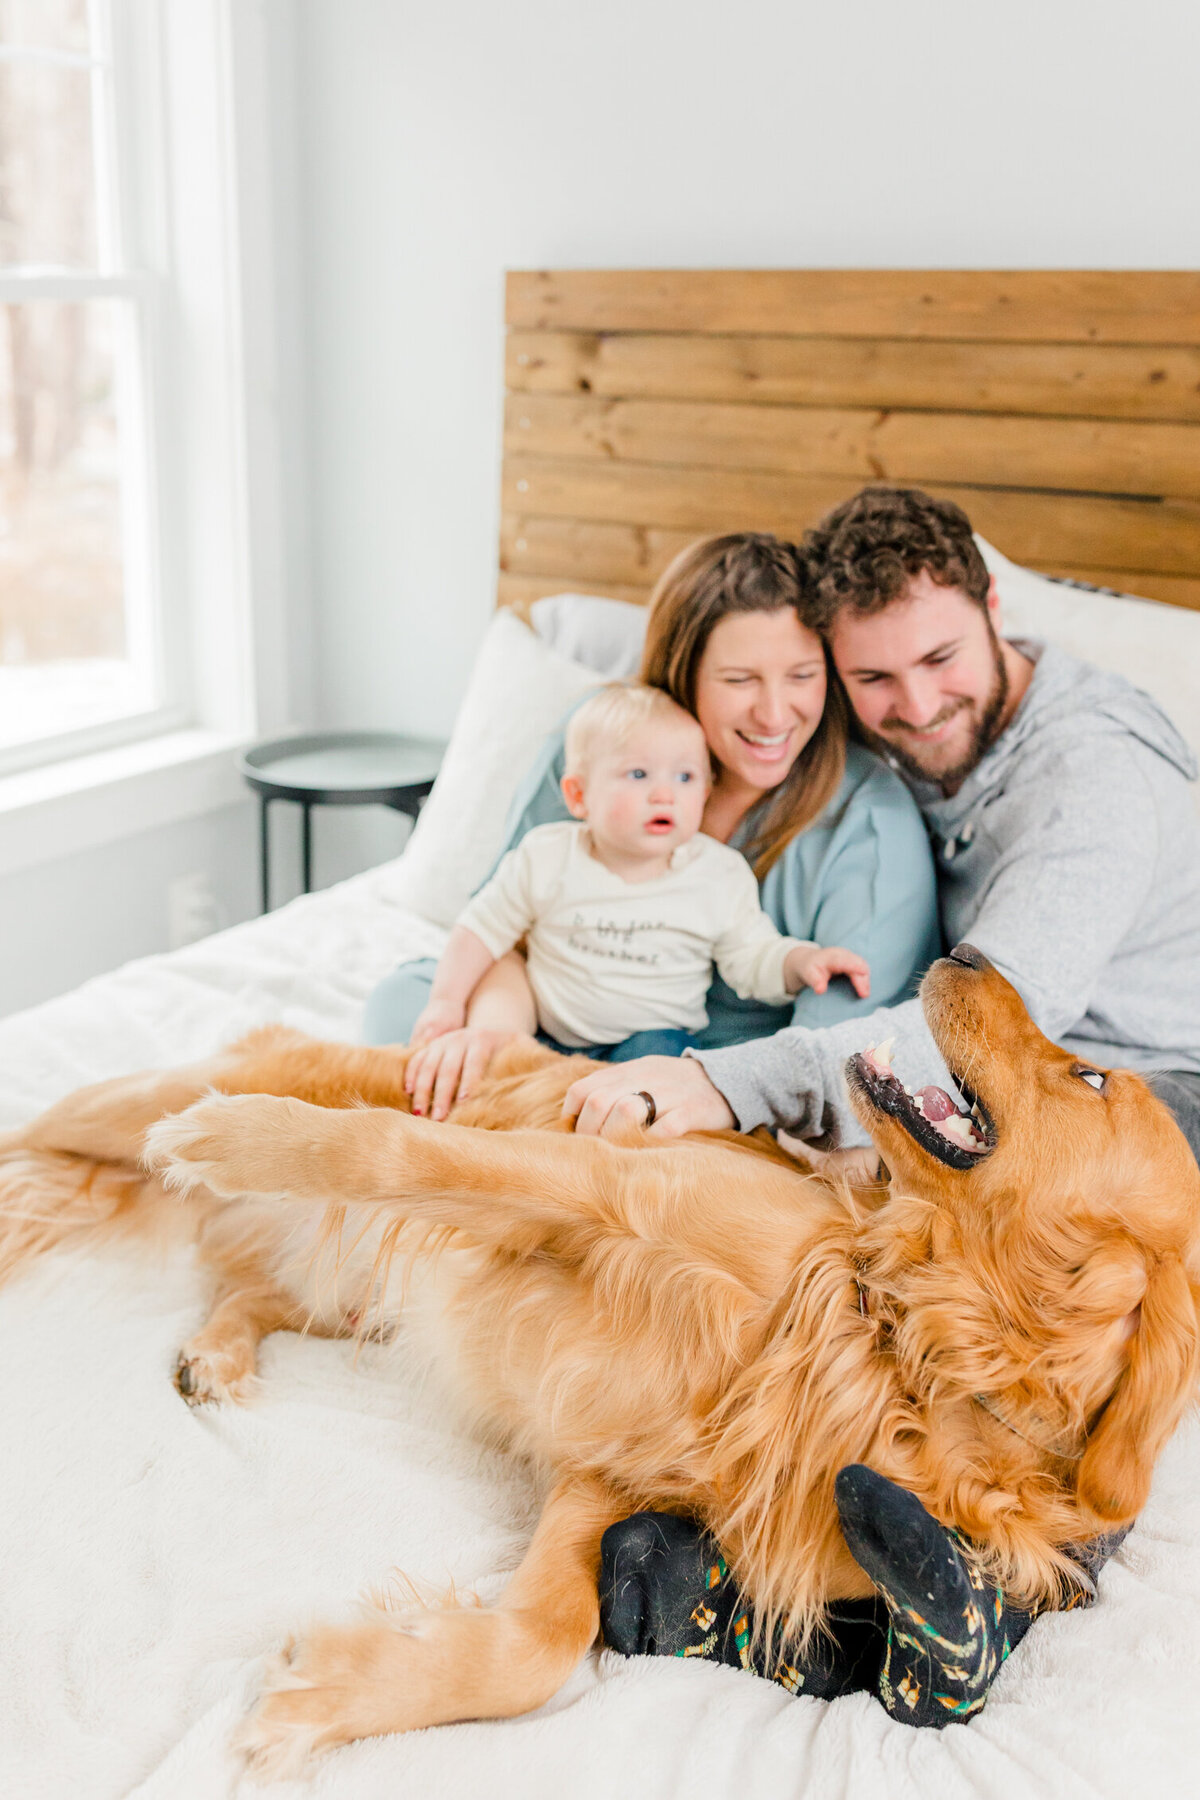 Mom, husband, and one-year old on bed laughing at dog